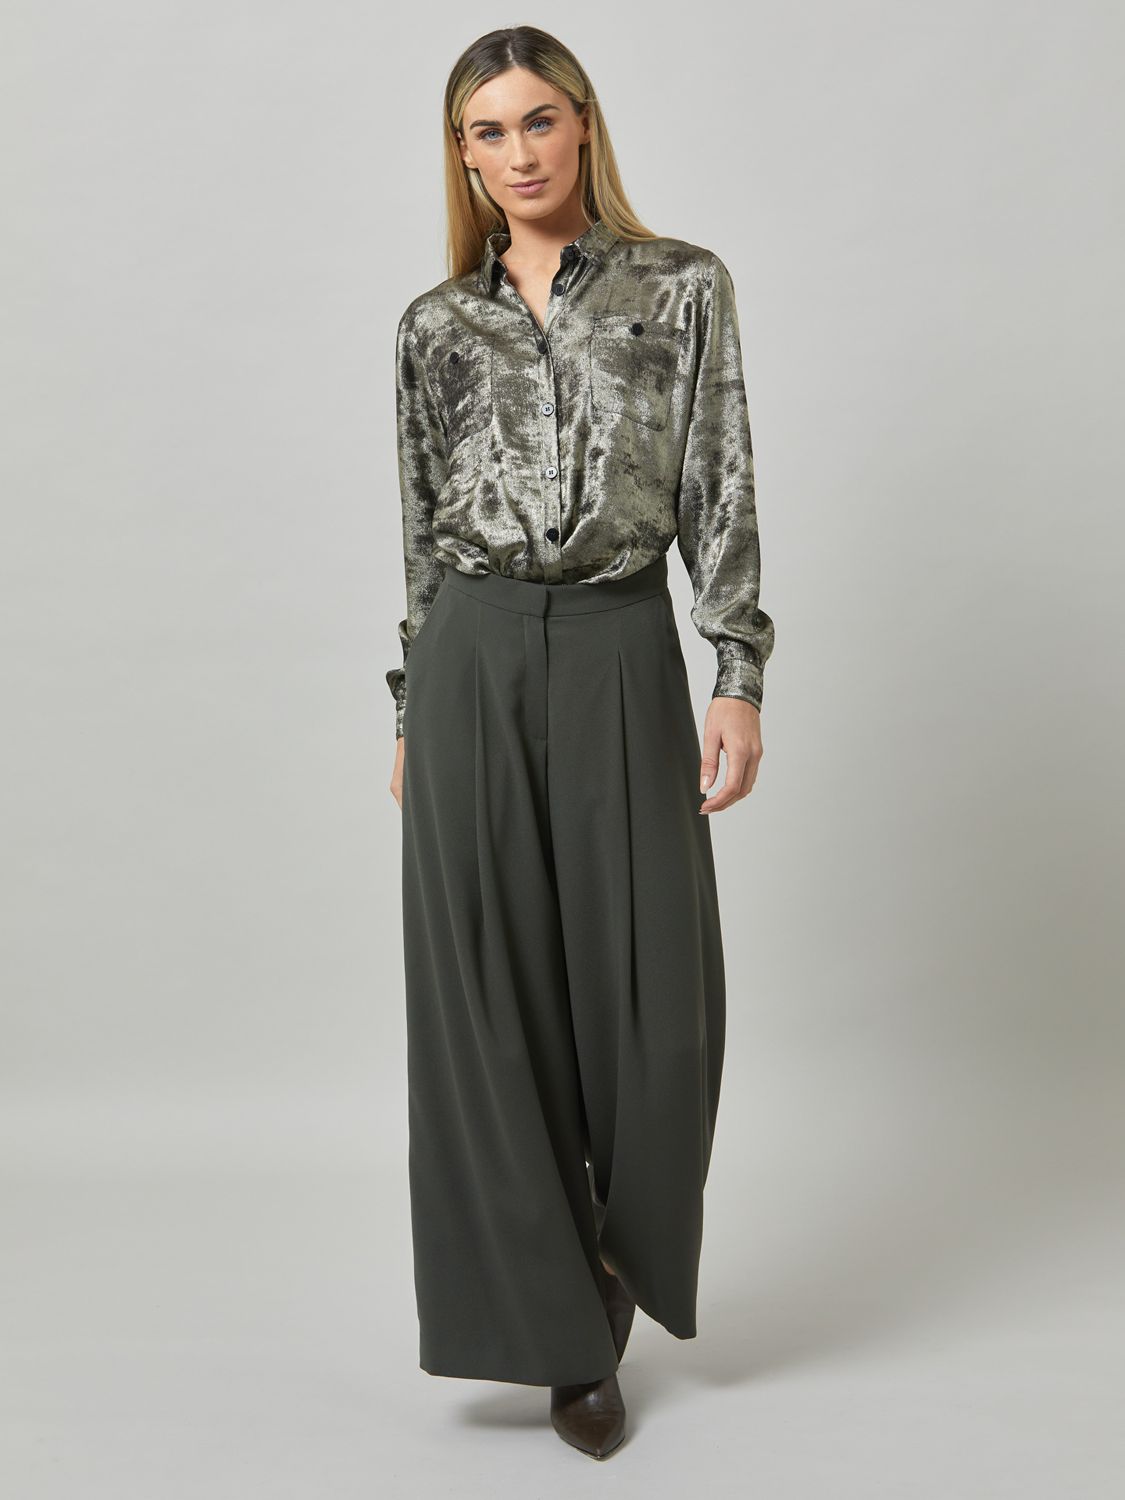 Helen McAlinden Charlize Trousers, Olive, 18